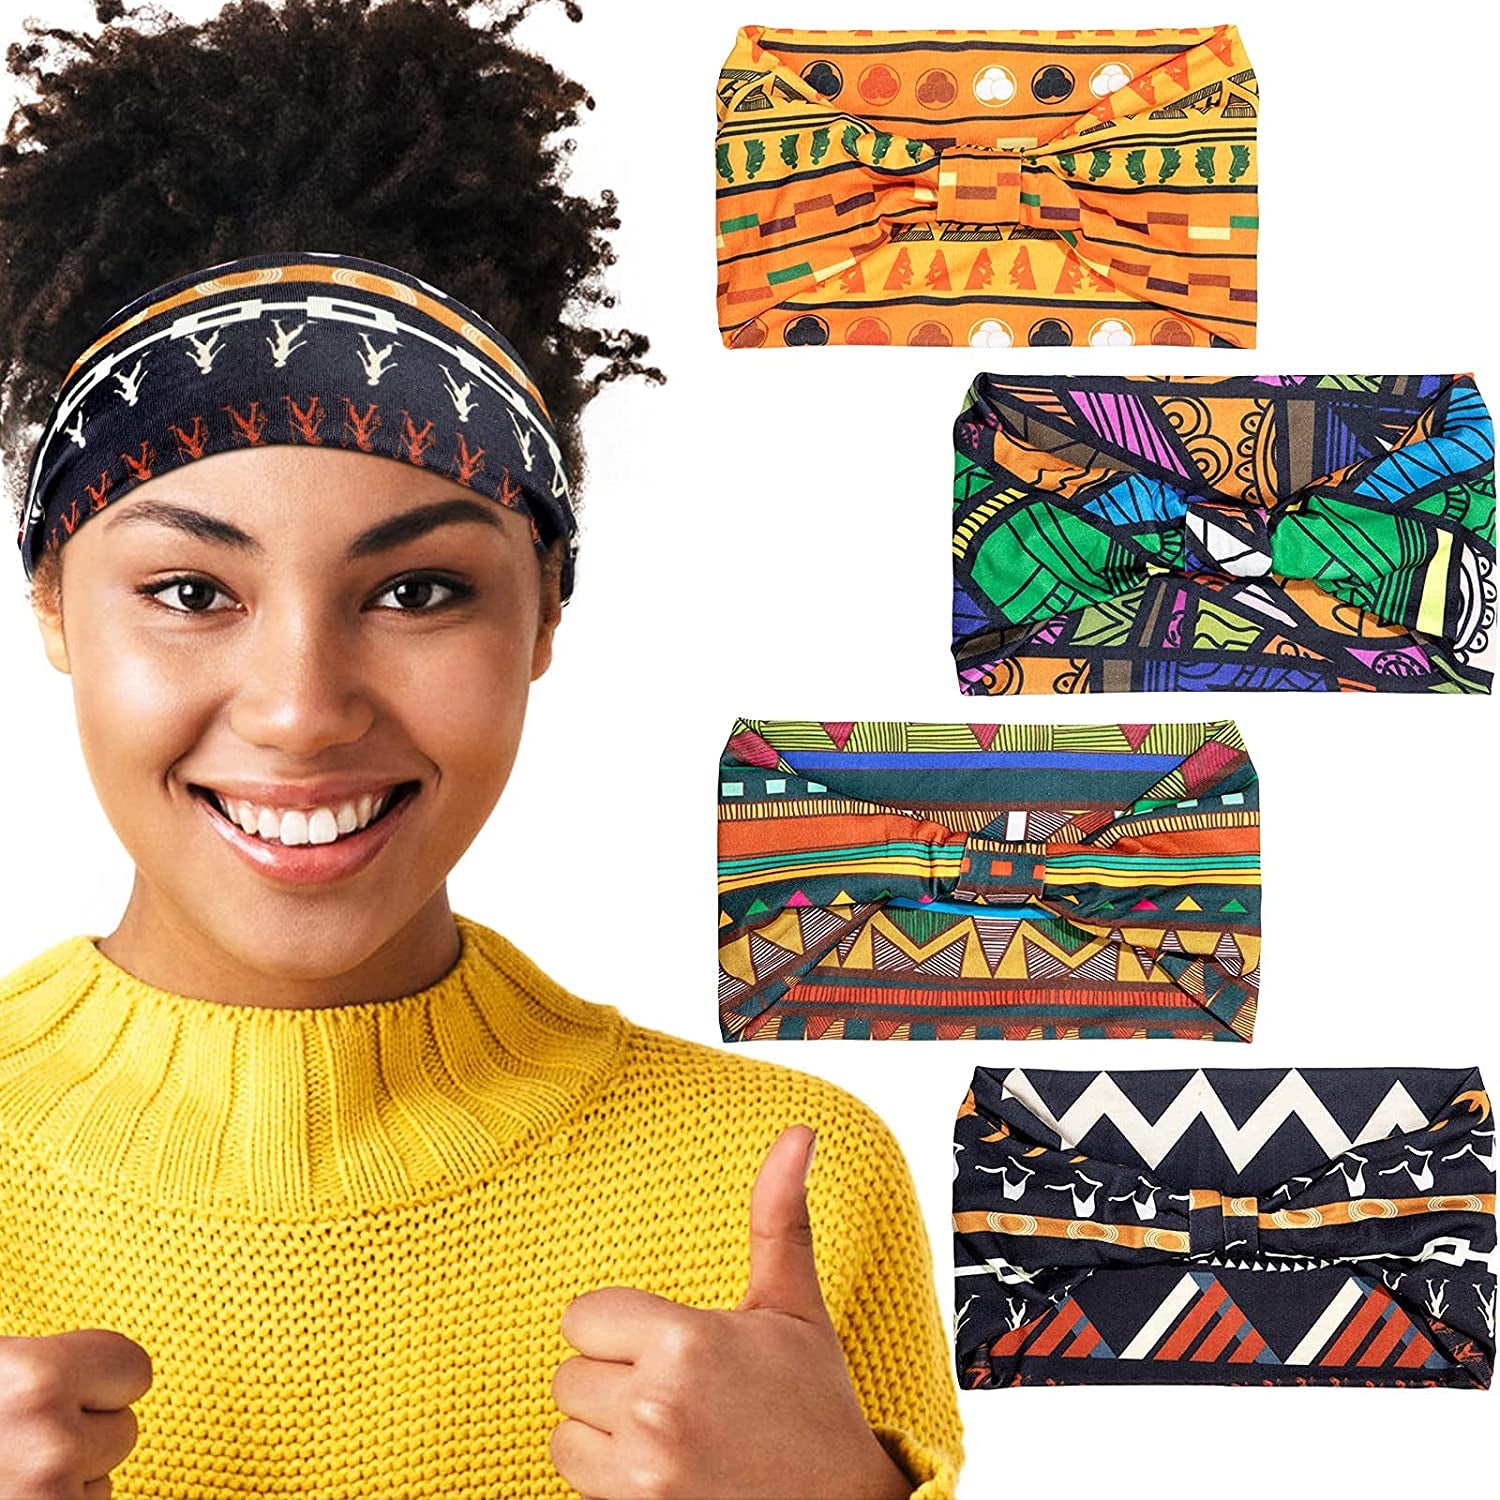 4 Pieces African Headbands Knotted Wide Yoga Stretchy Bandeau Headwrap Hair Accessories for Women and Girls (Vintage Series)